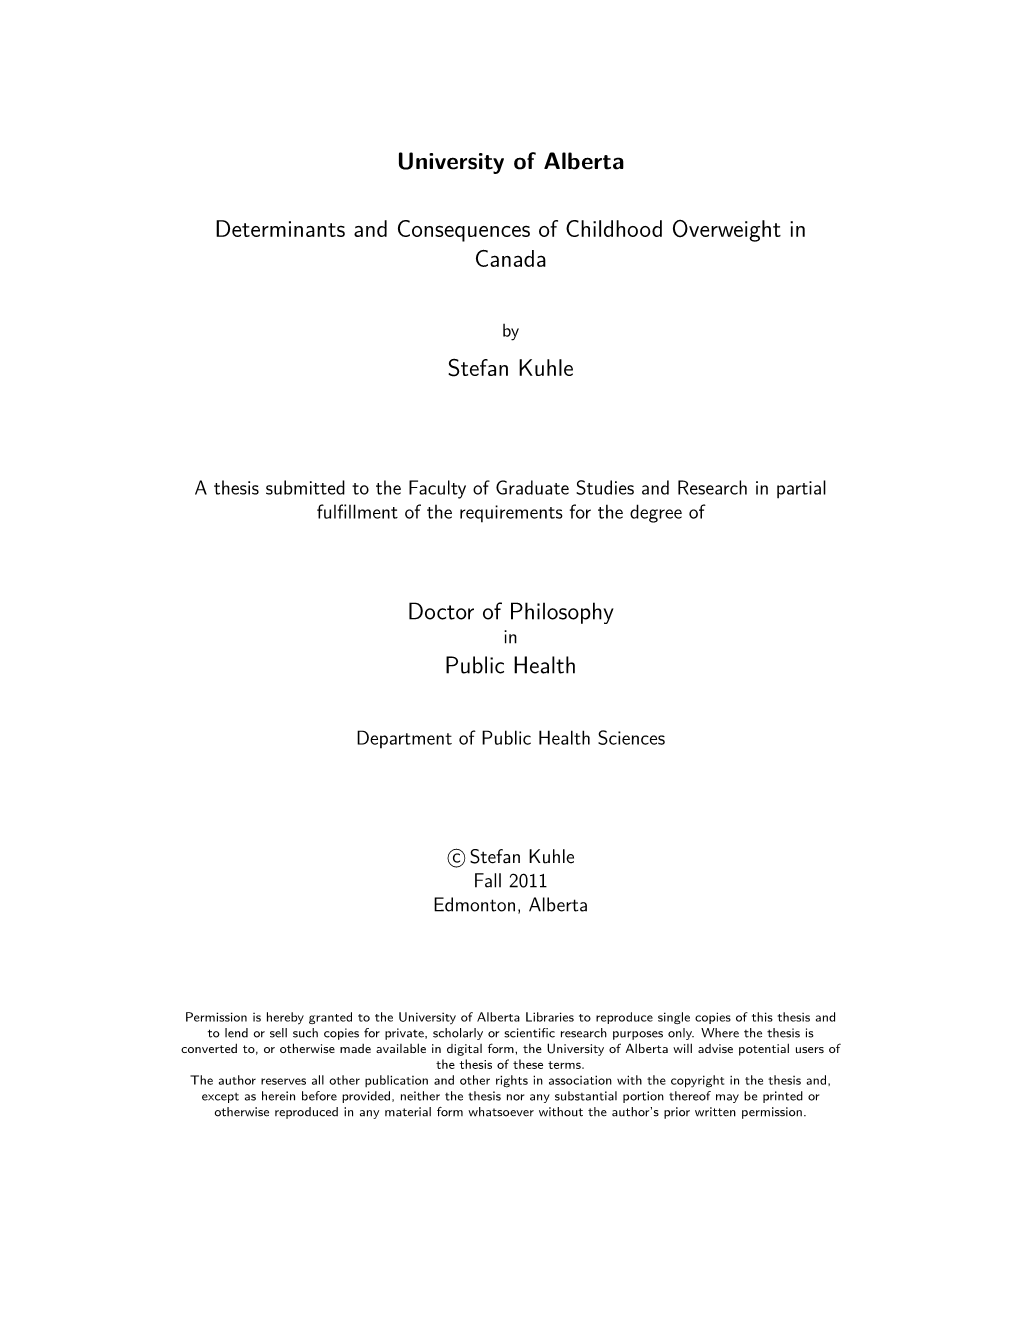 University of Alberta Determinants and Consequences of Childhood